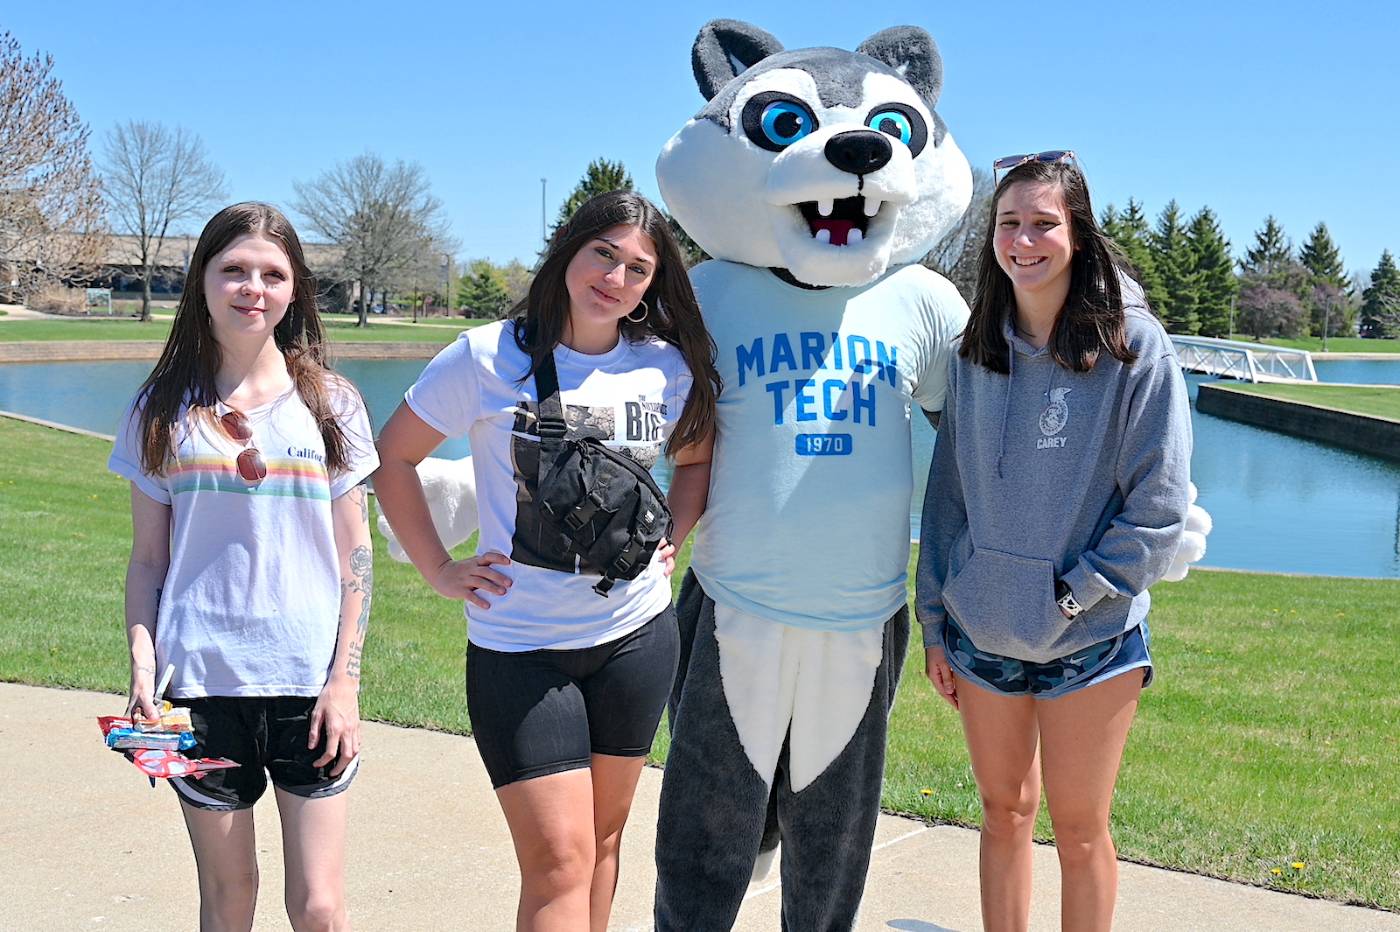 Students standing on campus with mascot